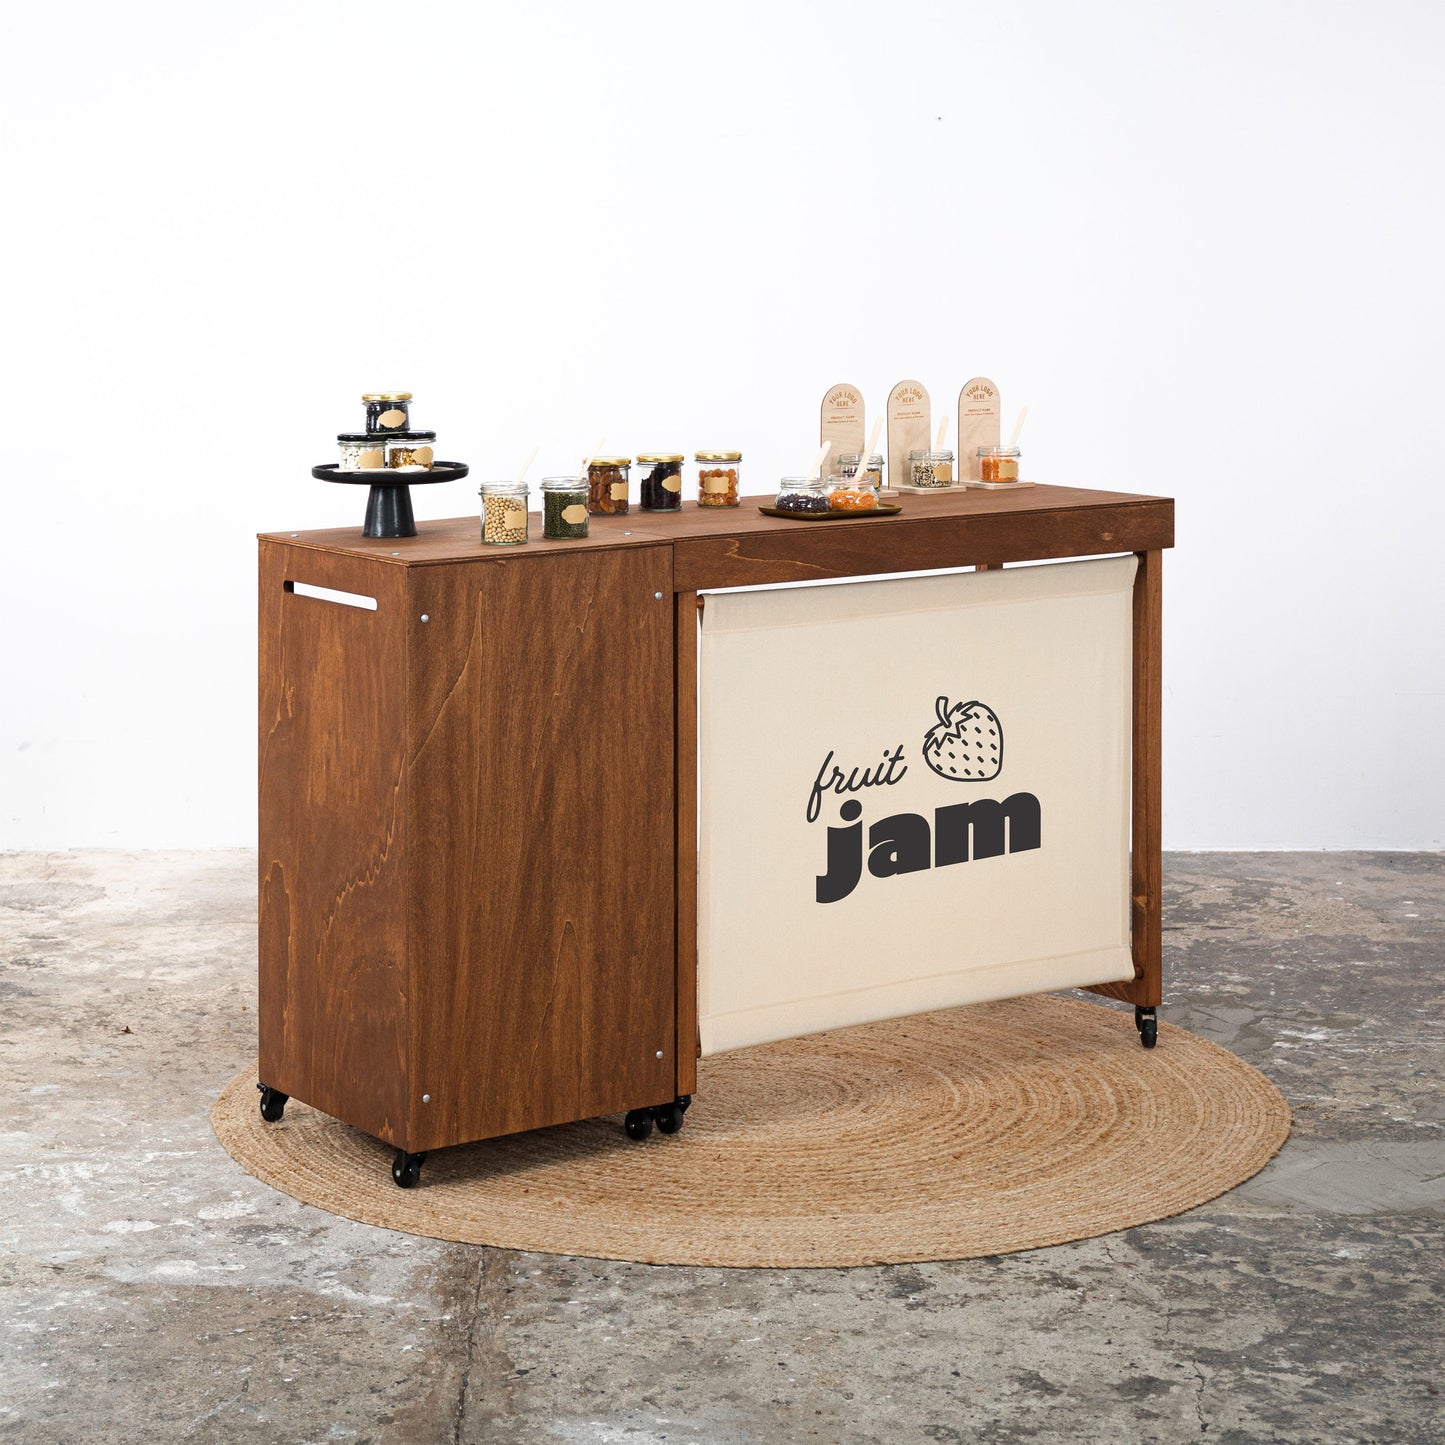 SET Vienna: Portable counter VC-06-W and table VC-04-C-W table in coffee color check out station, tasting station | Milimetry